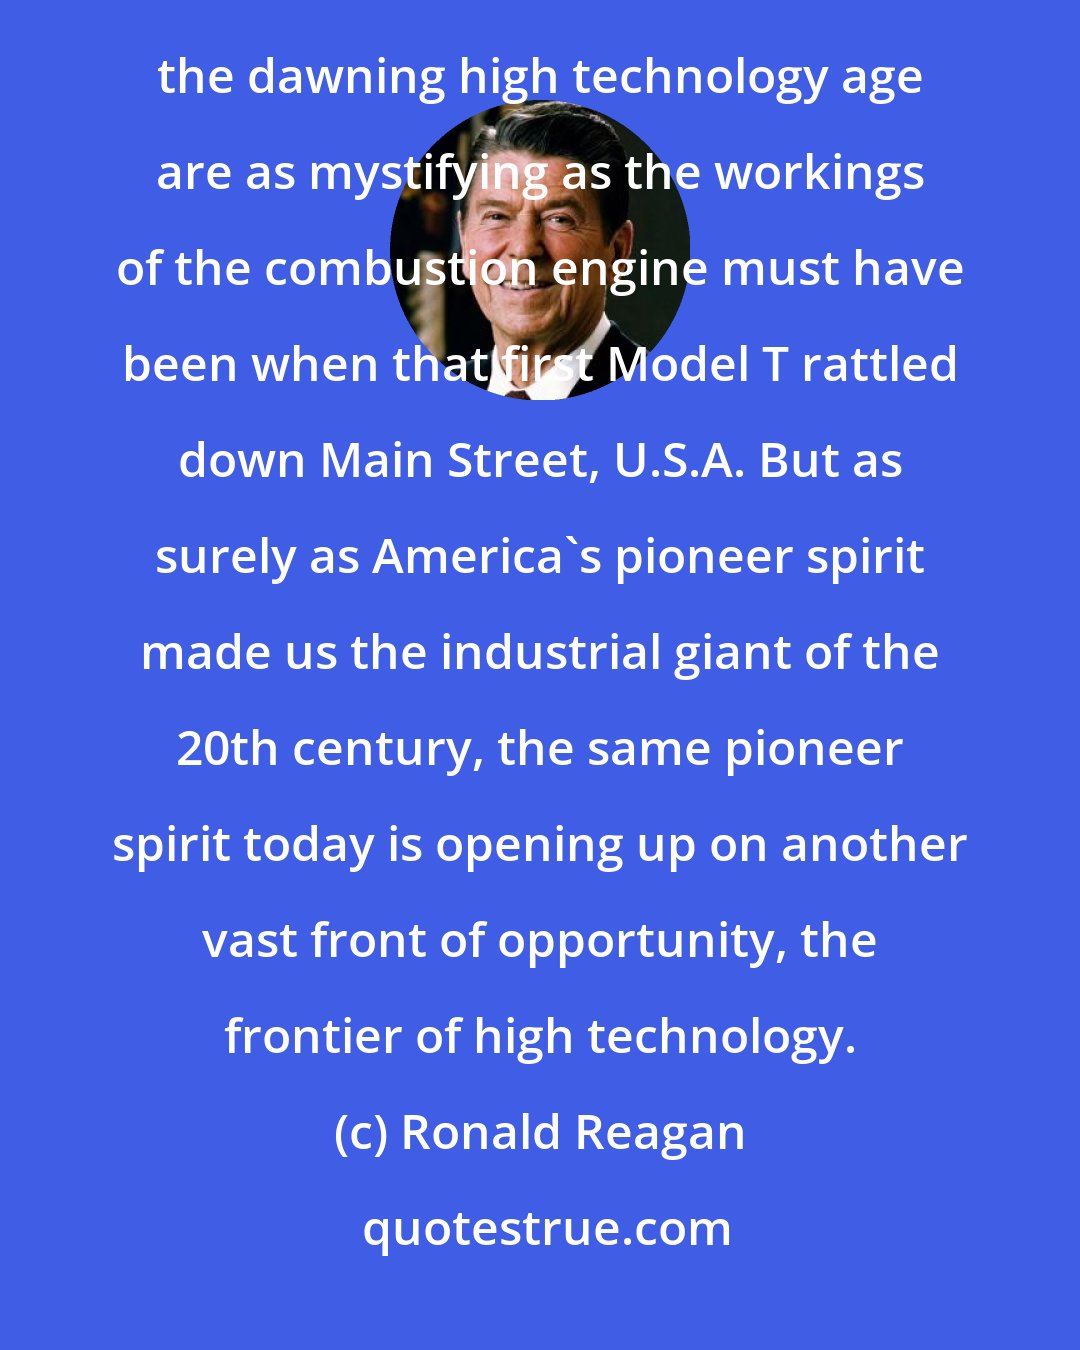 Ronald Reagan: To many of us now, computers, silicon chips, data processing, cybernetics, and all the other innovations of the dawning high technology age are as mystifying as the workings of the combustion engine must have been when that first Model T rattled down Main Street, U.S.A. But as surely as America's pioneer spirit made us the industrial giant of the 20th century, the same pioneer spirit today is opening up on another vast front of opportunity, the frontier of high technology.